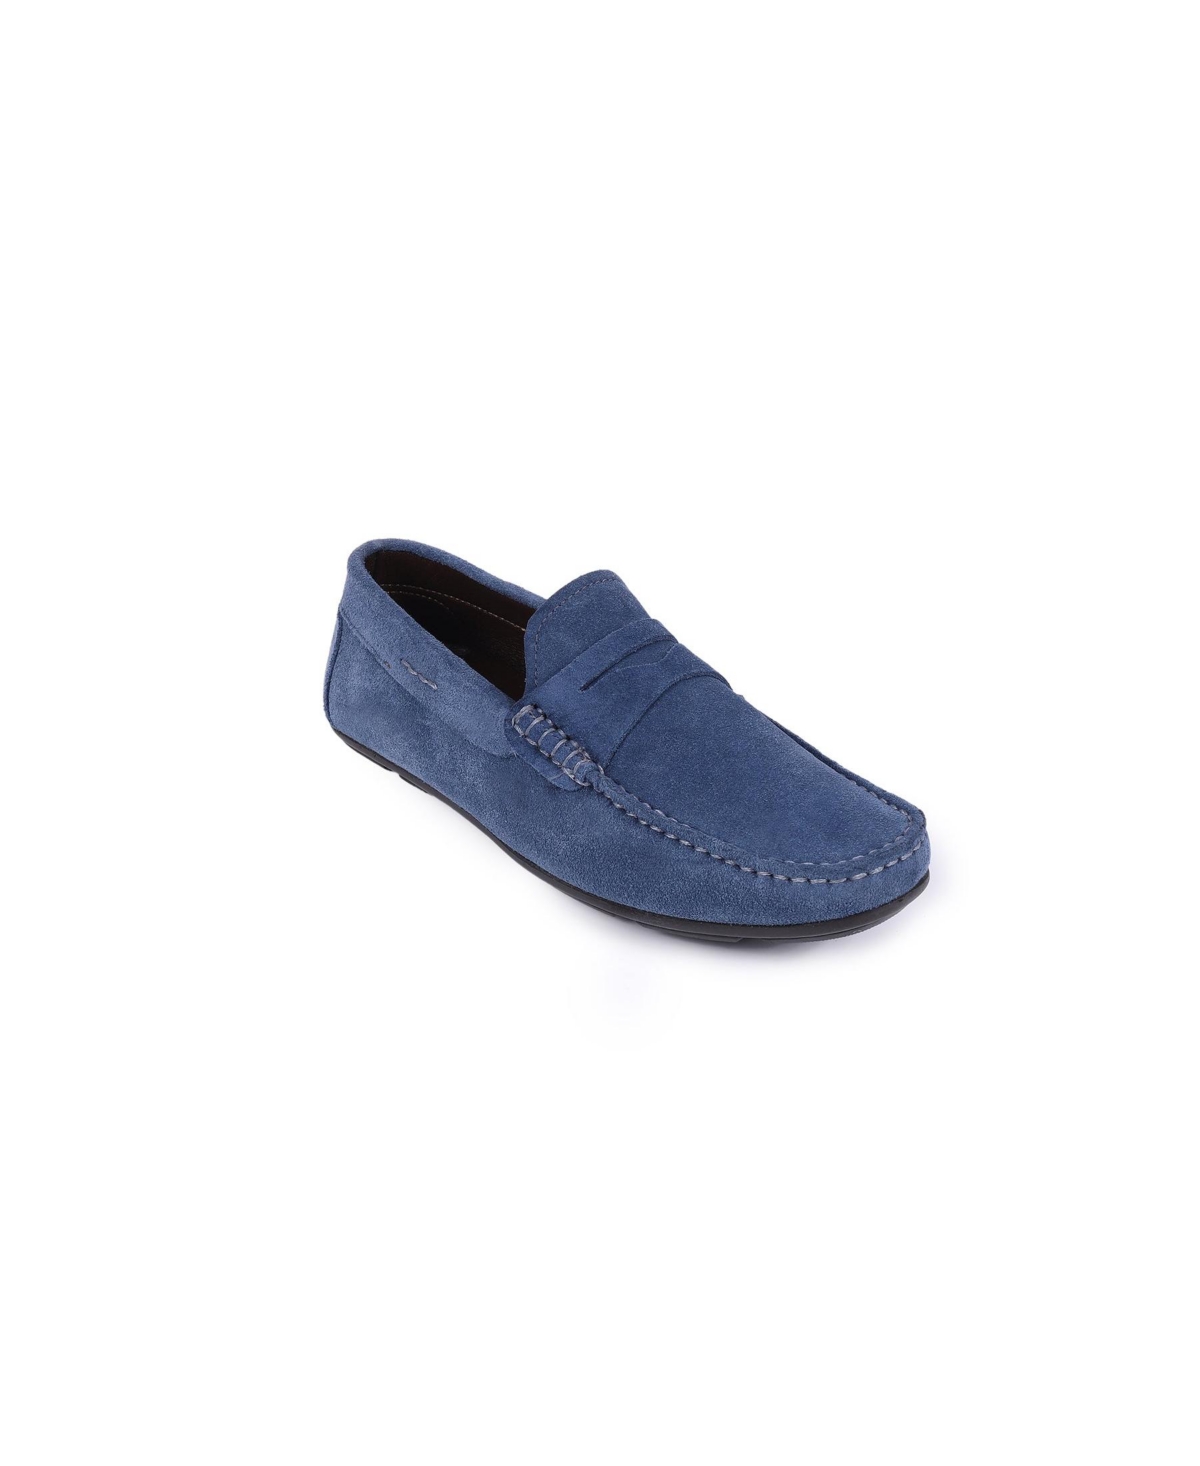 VELLAPAIS MEN'S JASMINE SUEDE ALL DAY COMFORT DRIVERS